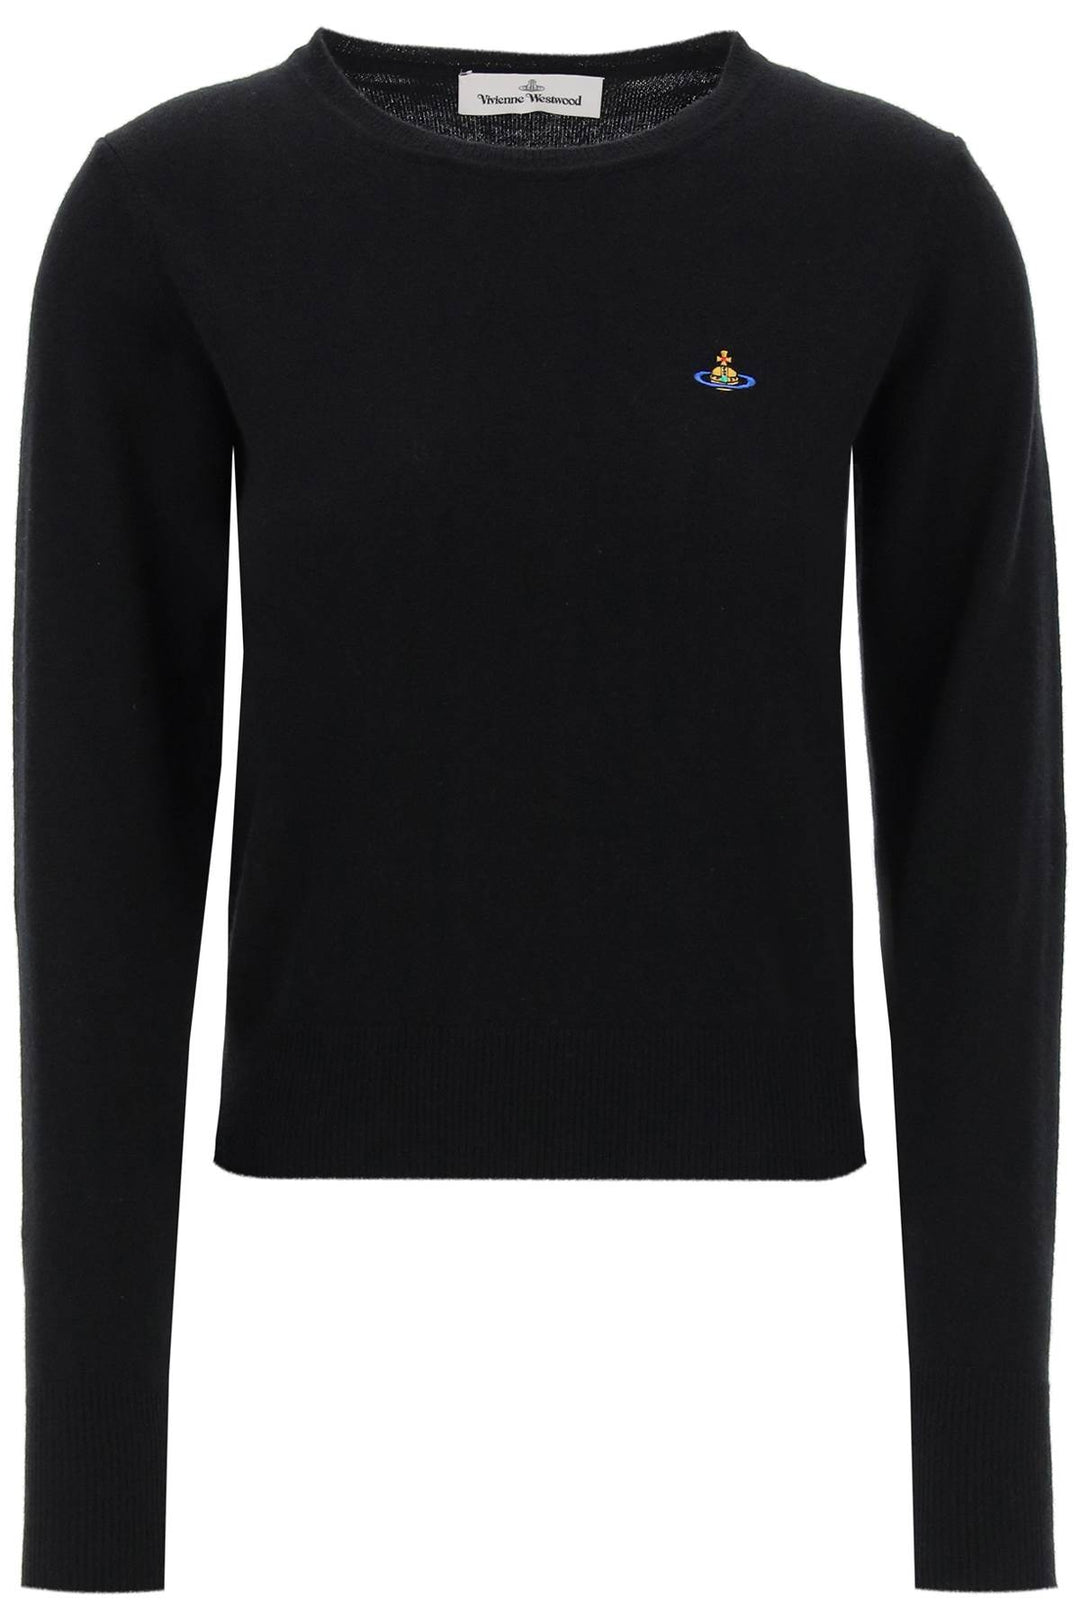 Vivienne Westwood Bea Cardigan With Logo Embroidery   Black